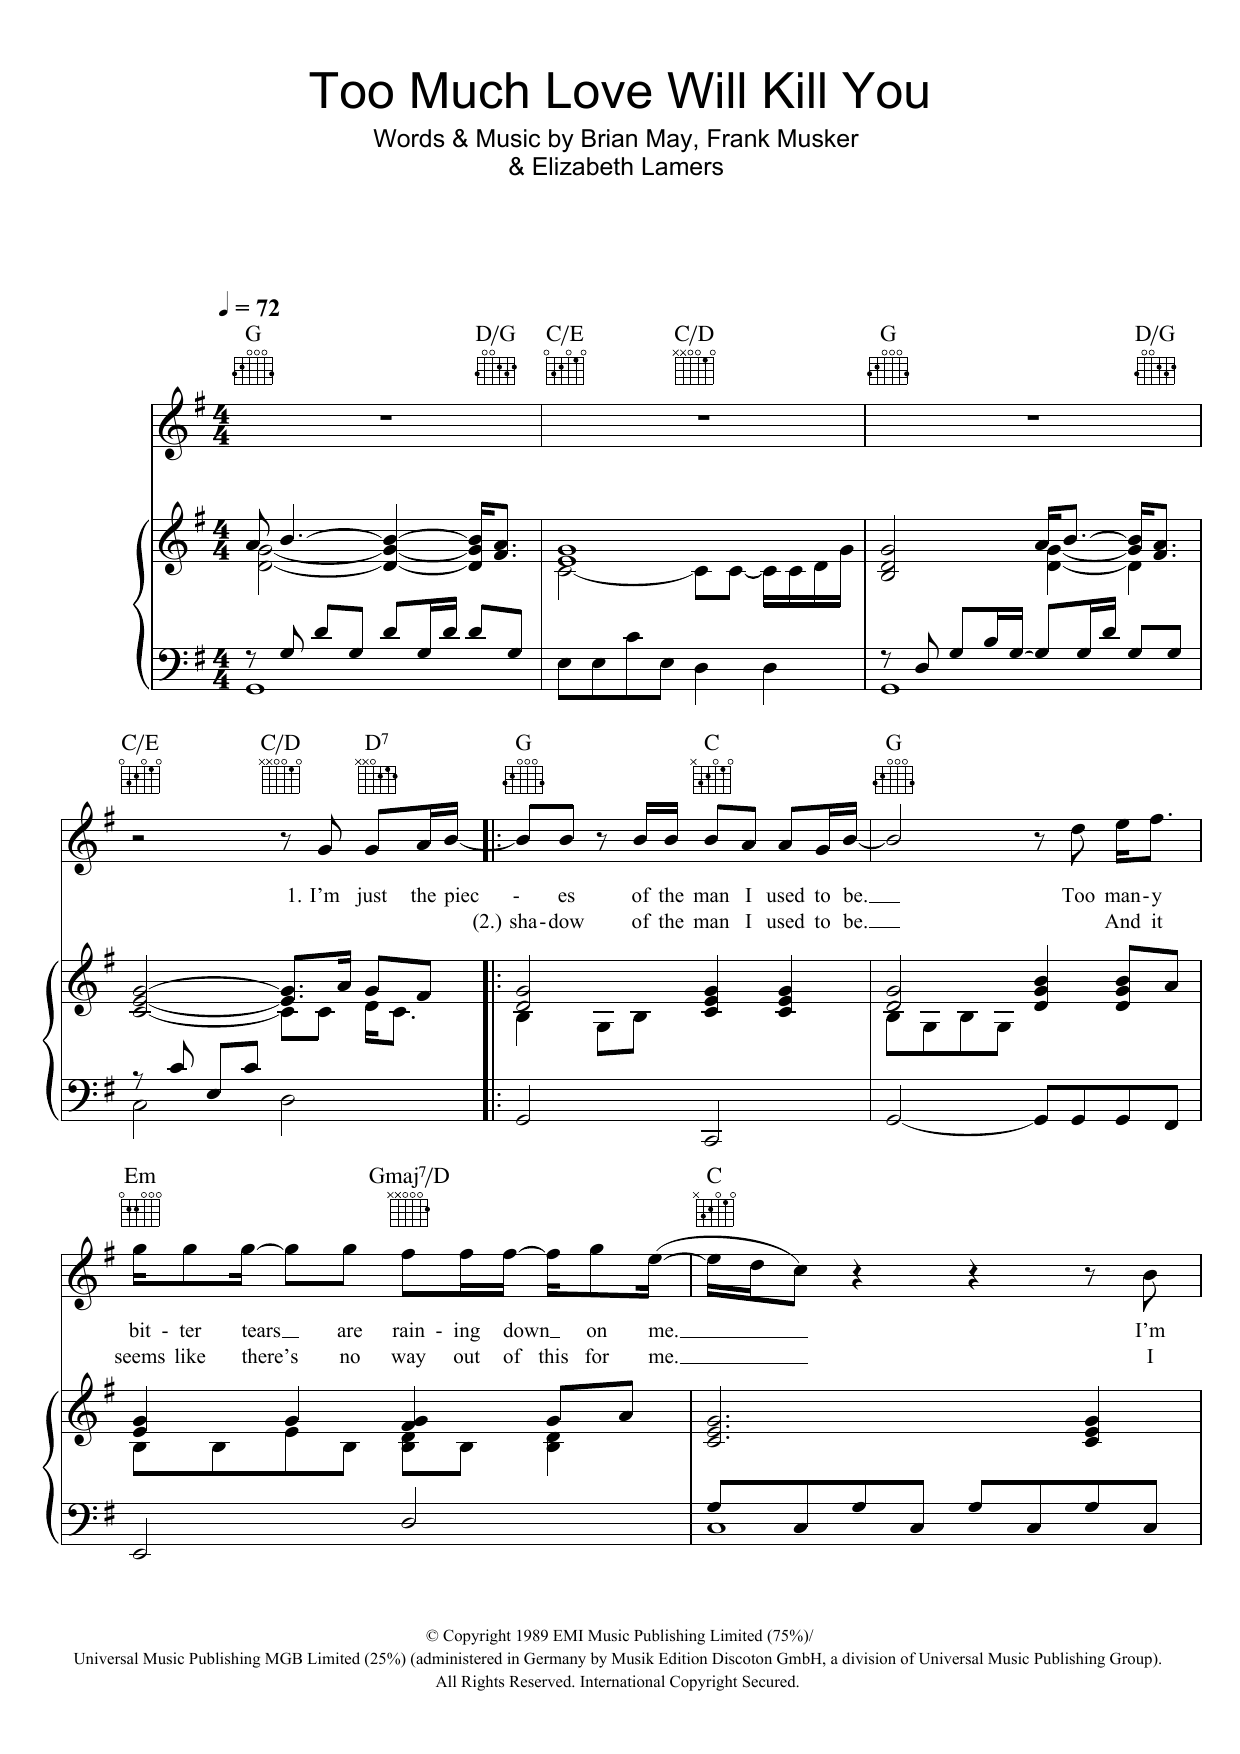 Download Queen Too Much Love Will Kill You Sheet Music